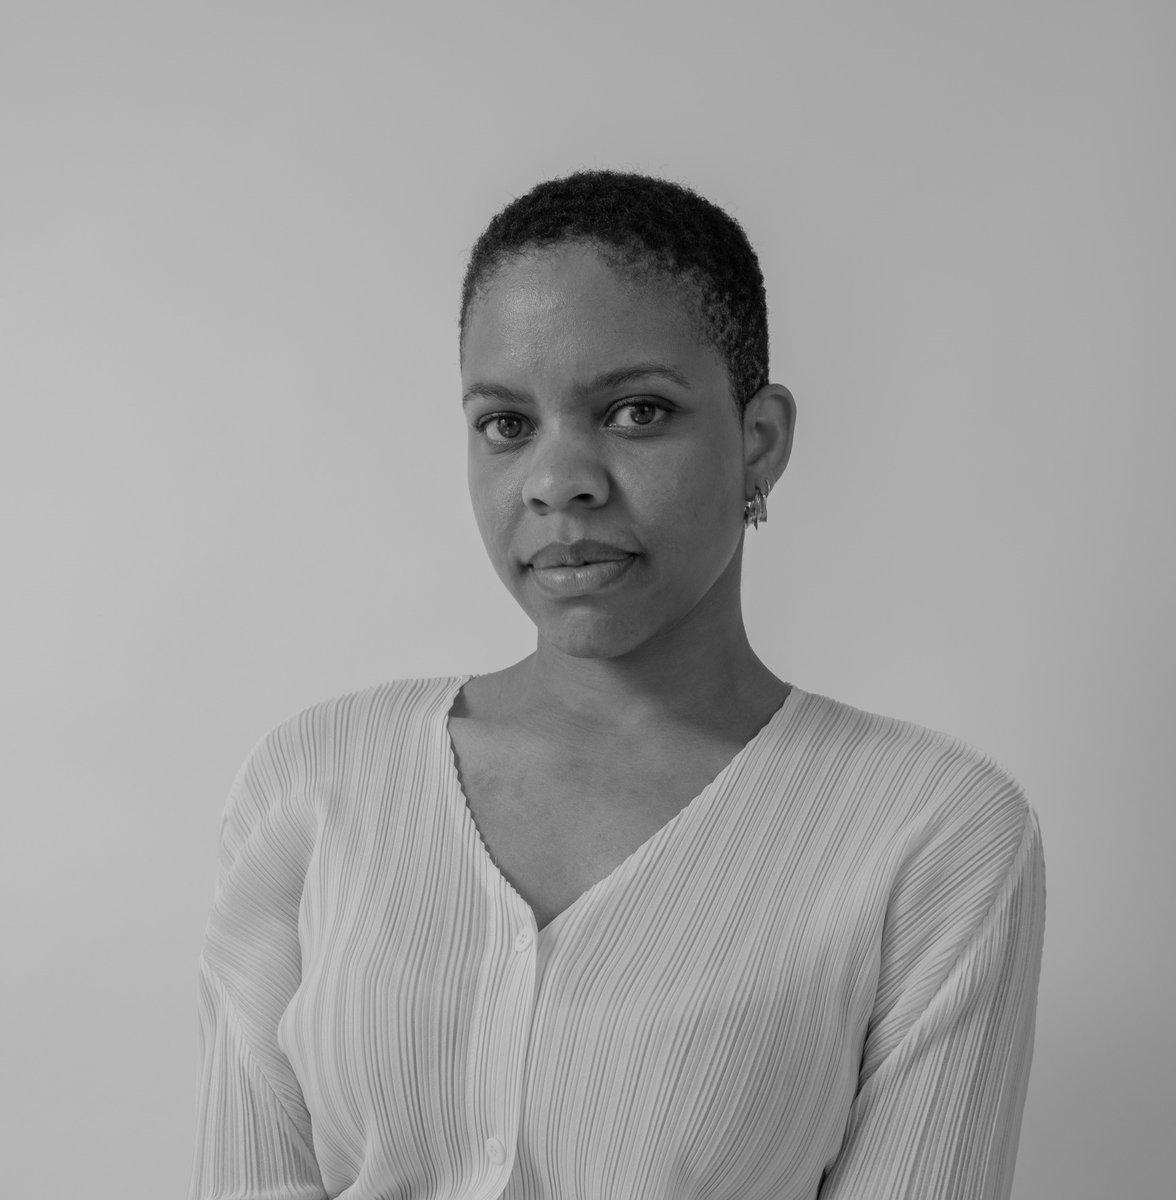 'The process of writing is never neat, linear or contained. It is something both spiritual and material, a collection of dreams somehow becoming a reality of ink and paper.' Author Vanessa Onwuemezi on forming a short story collection. Read: bit.ly/4azFlLt